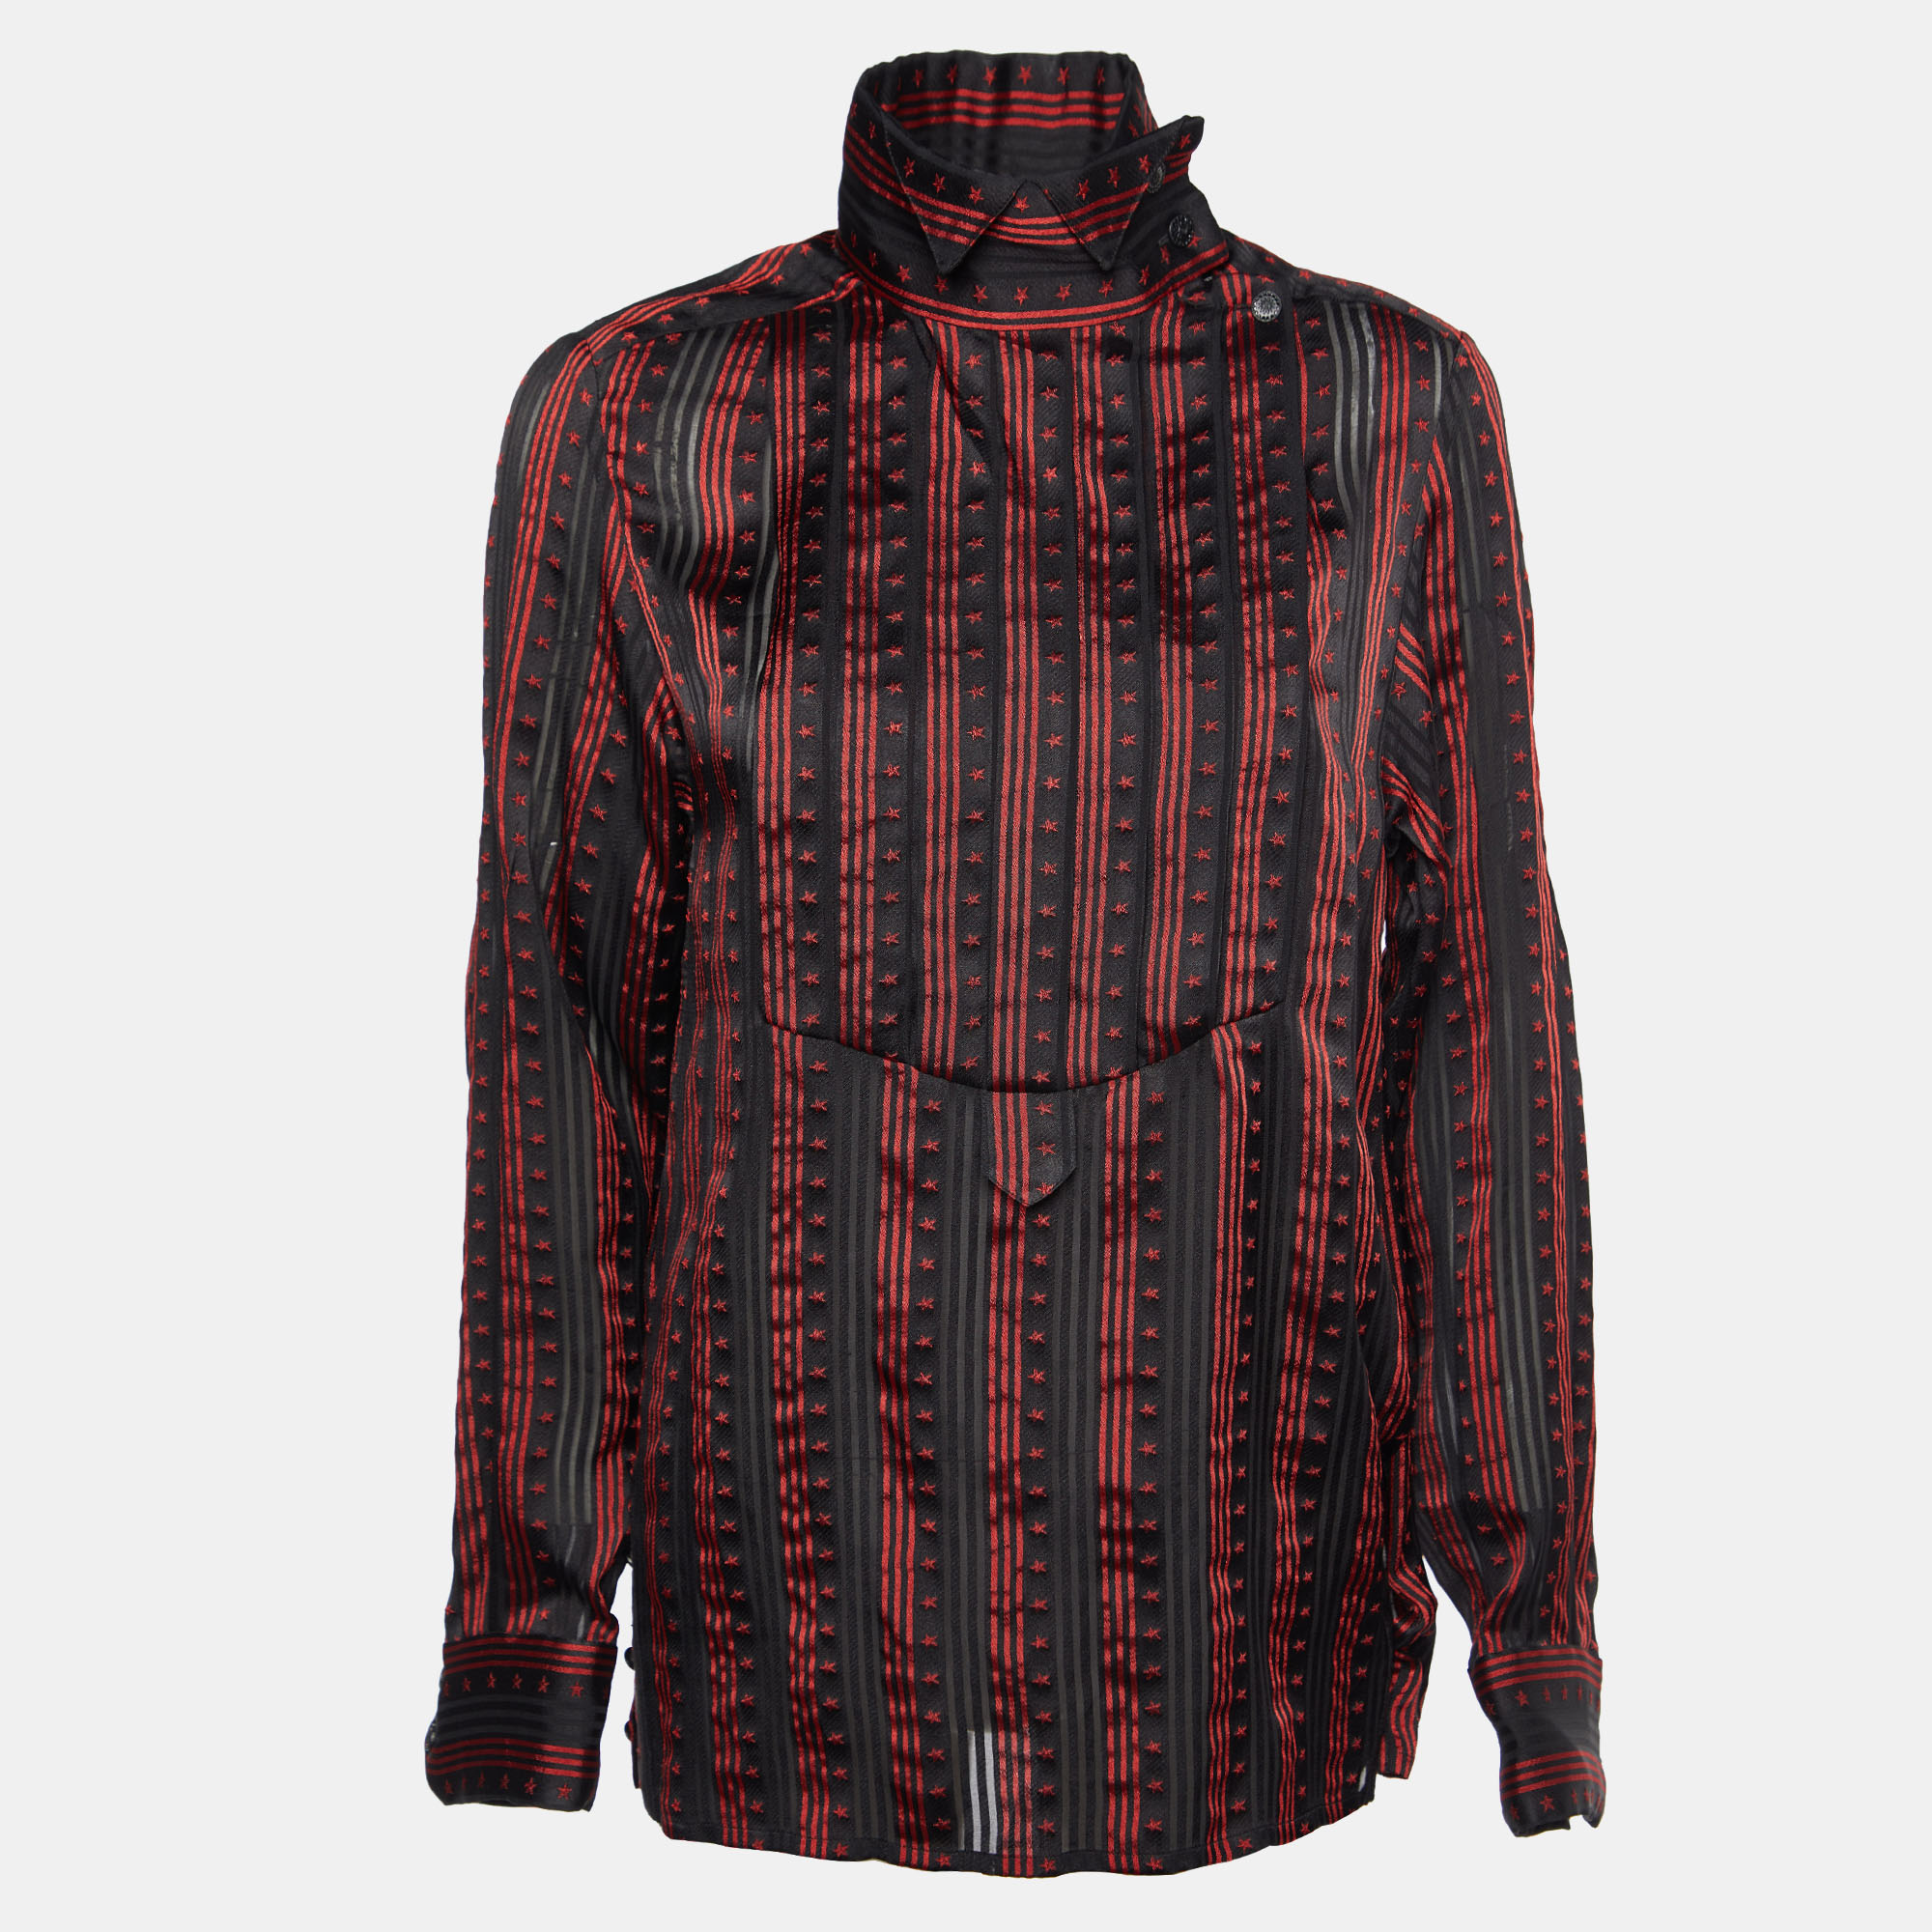 Chanel Black/Red Star Striped Silk Pleated Sheer Shirt L